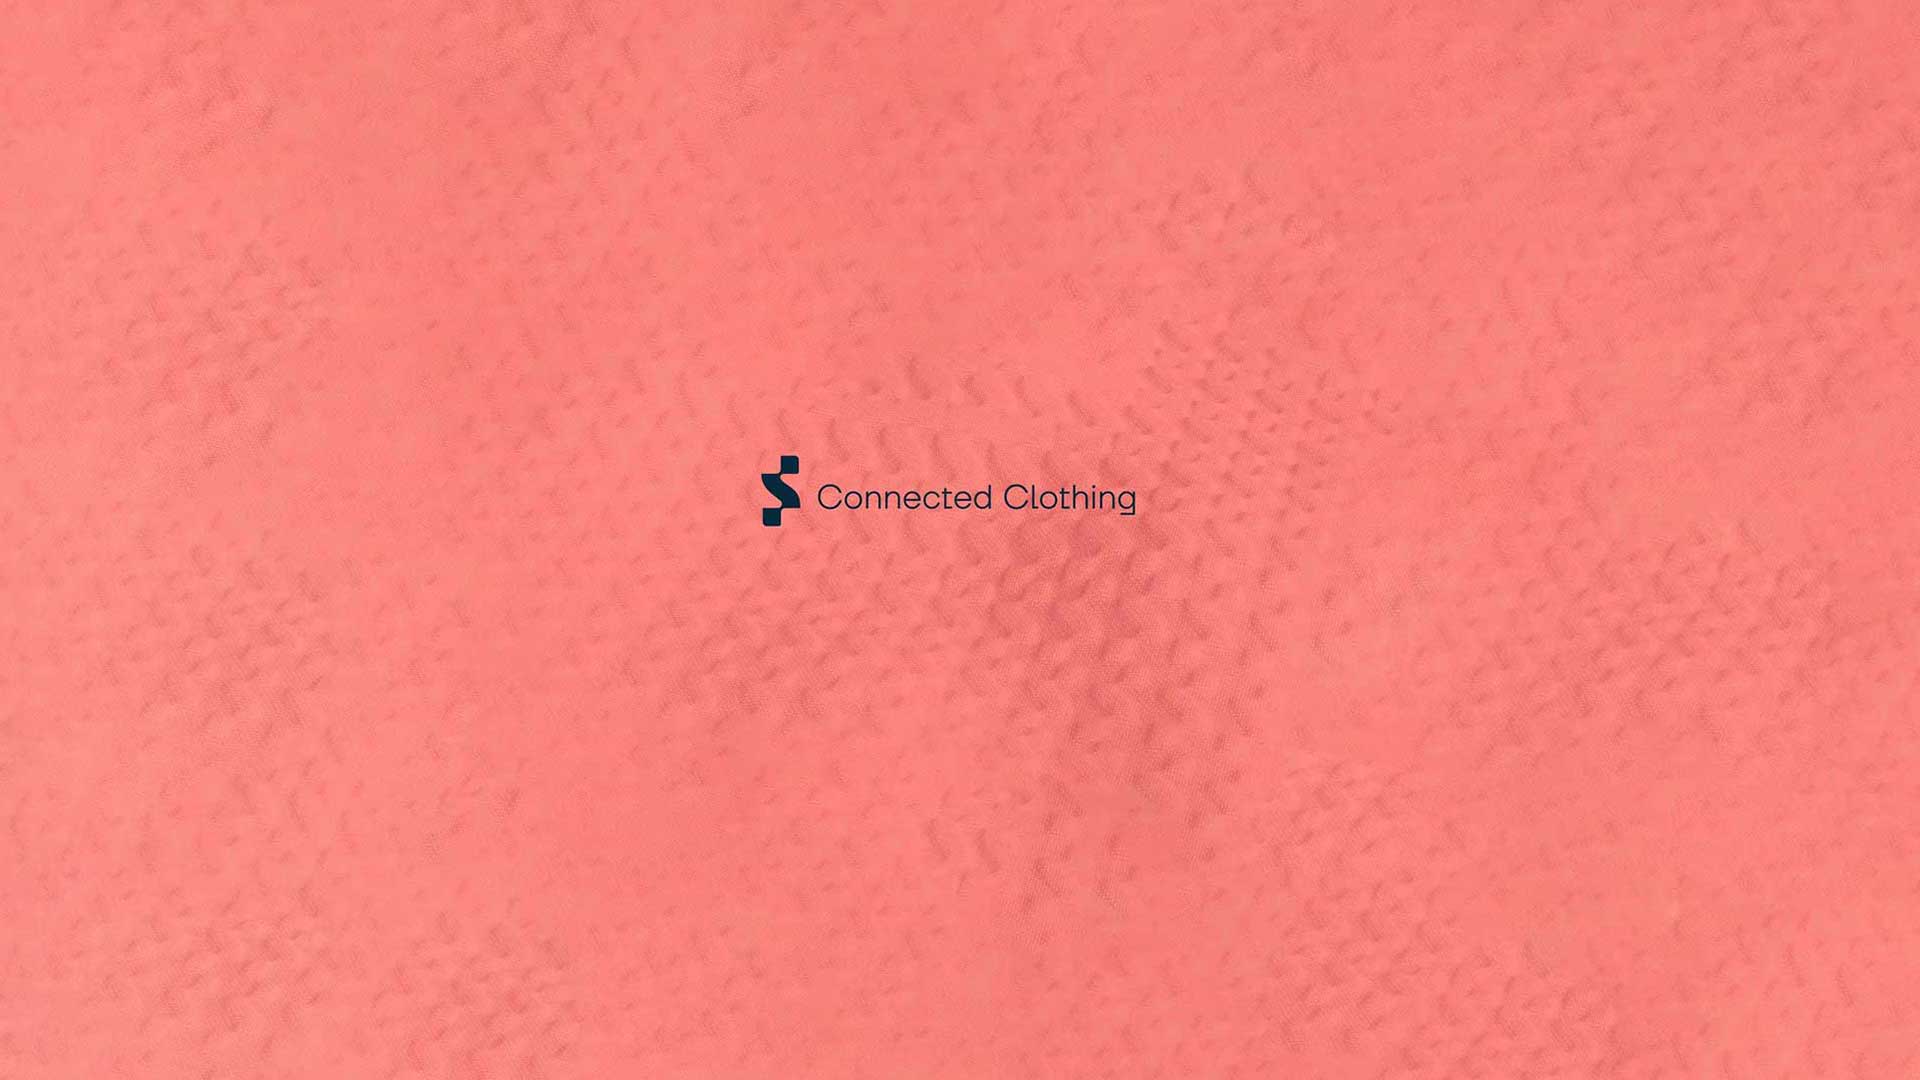 Connected clothing